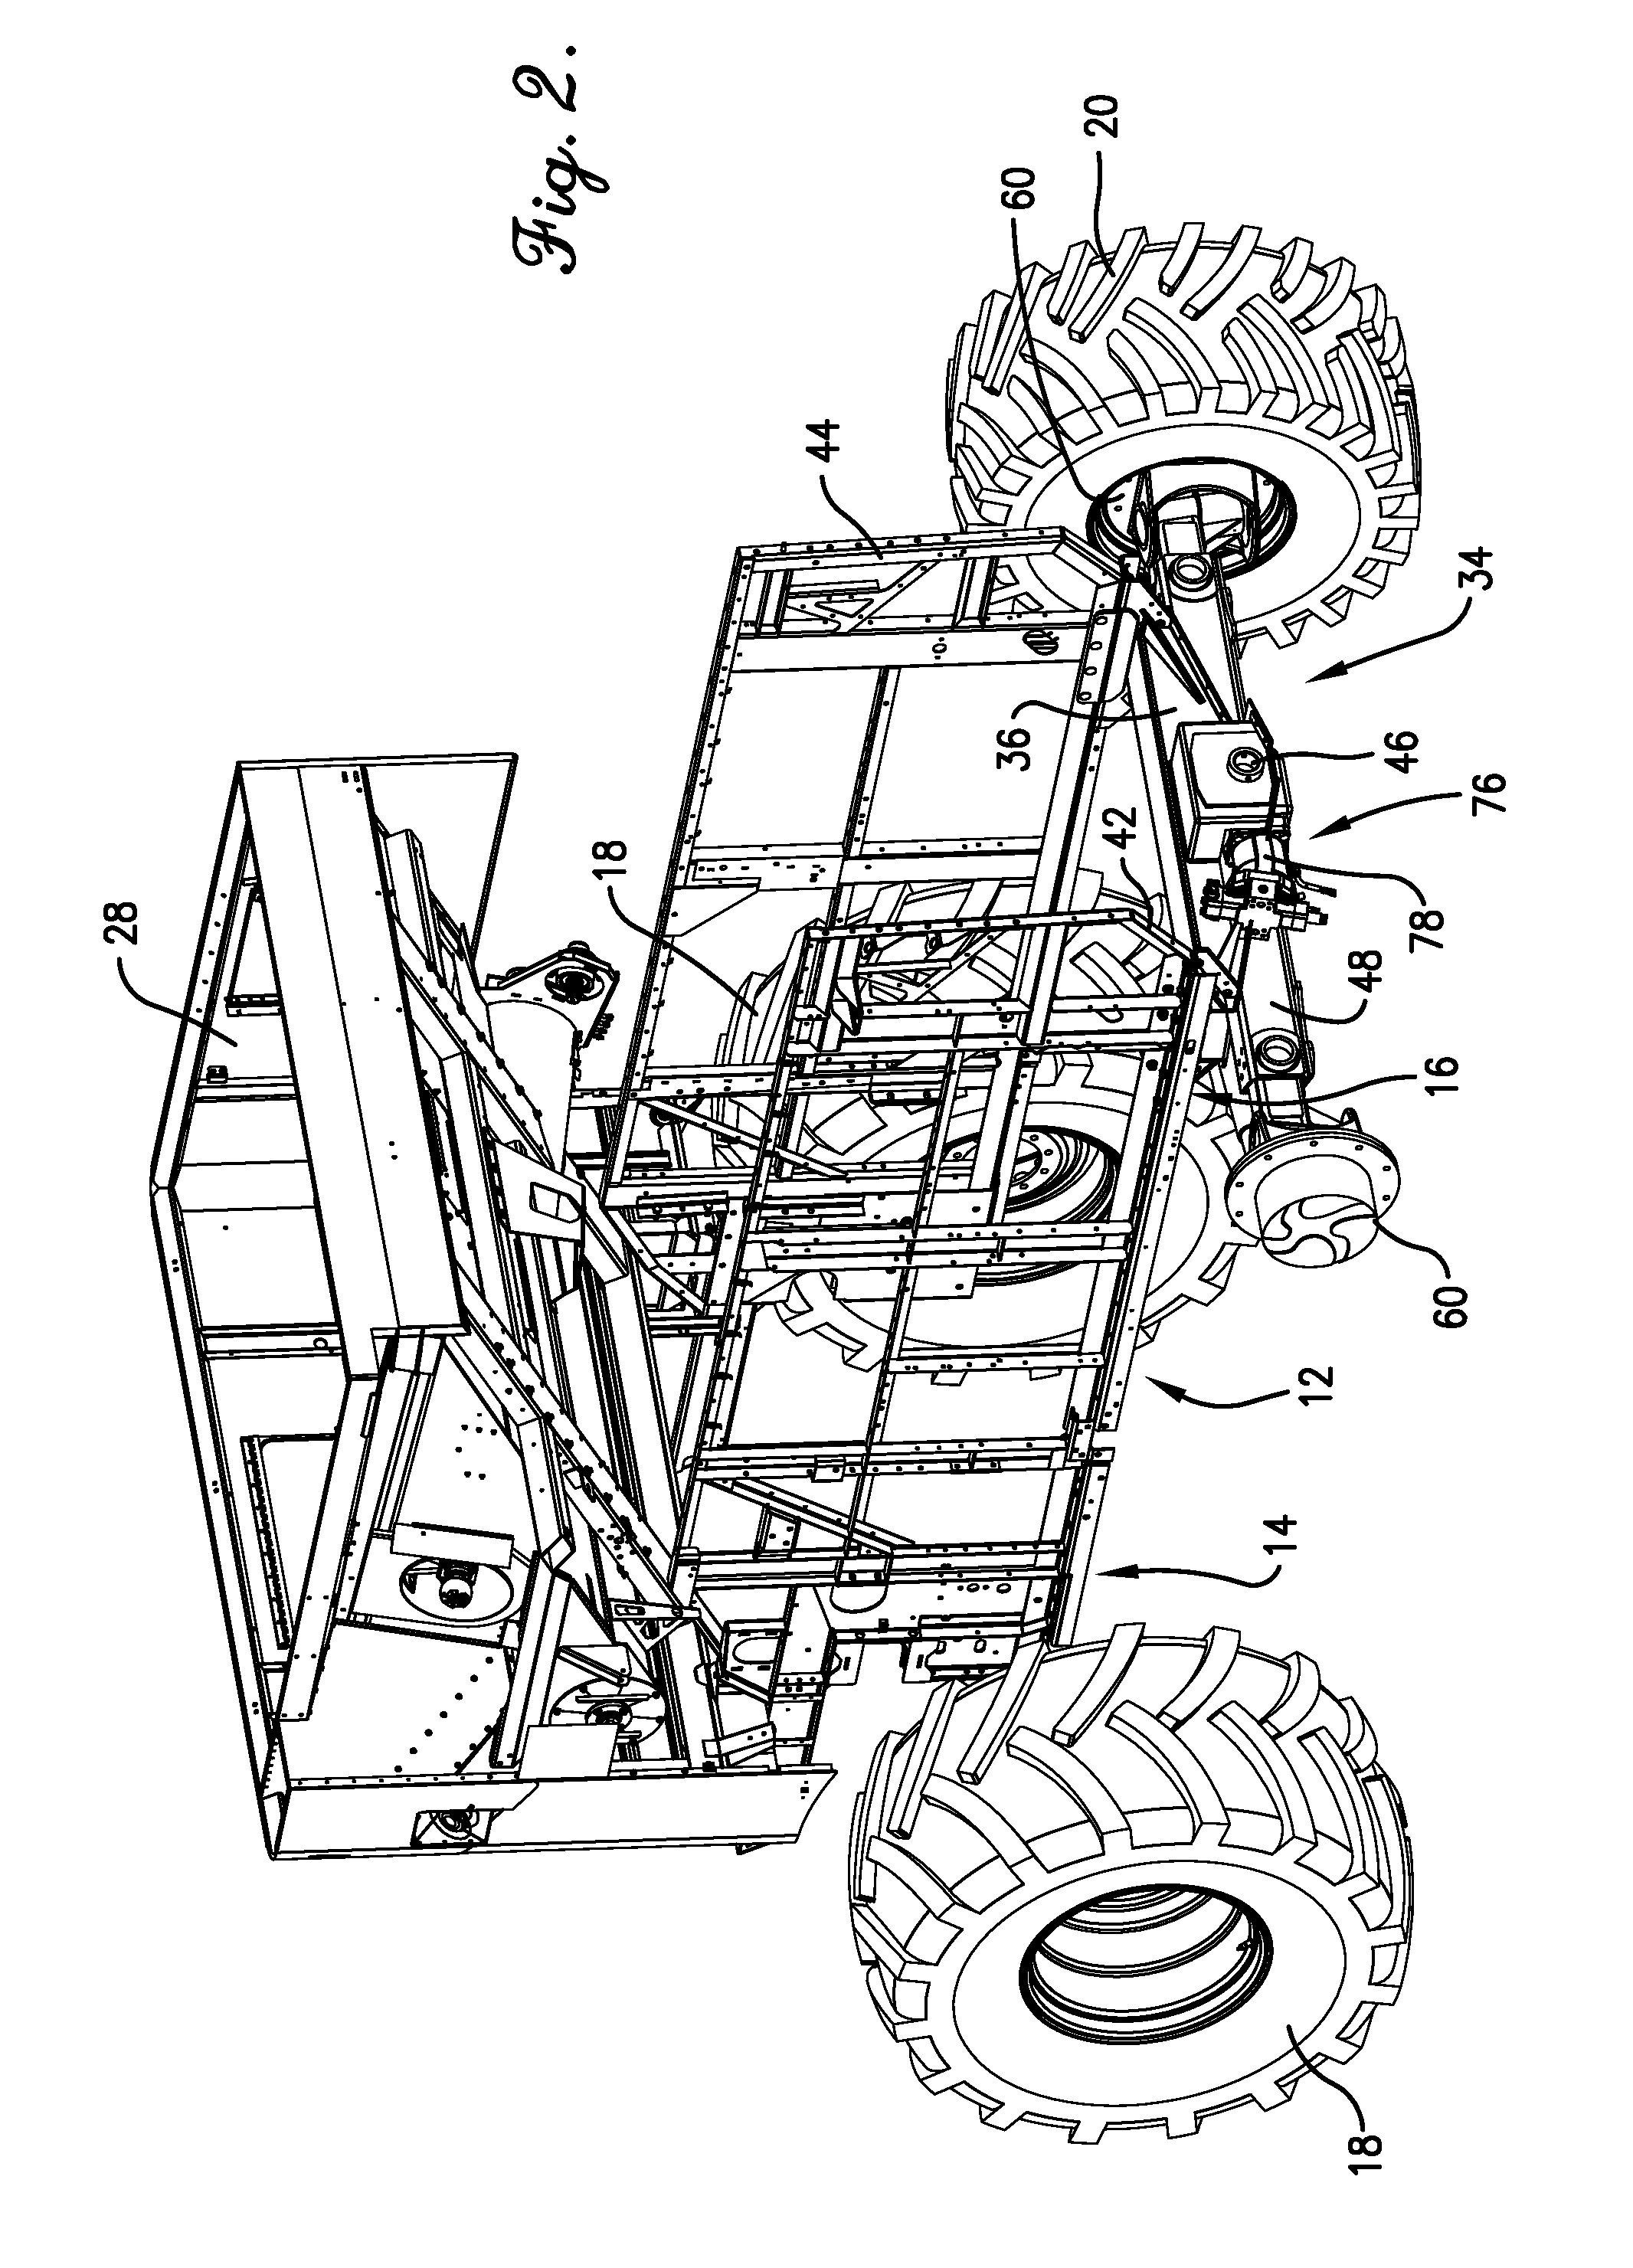 Harvester with extendable rear axle